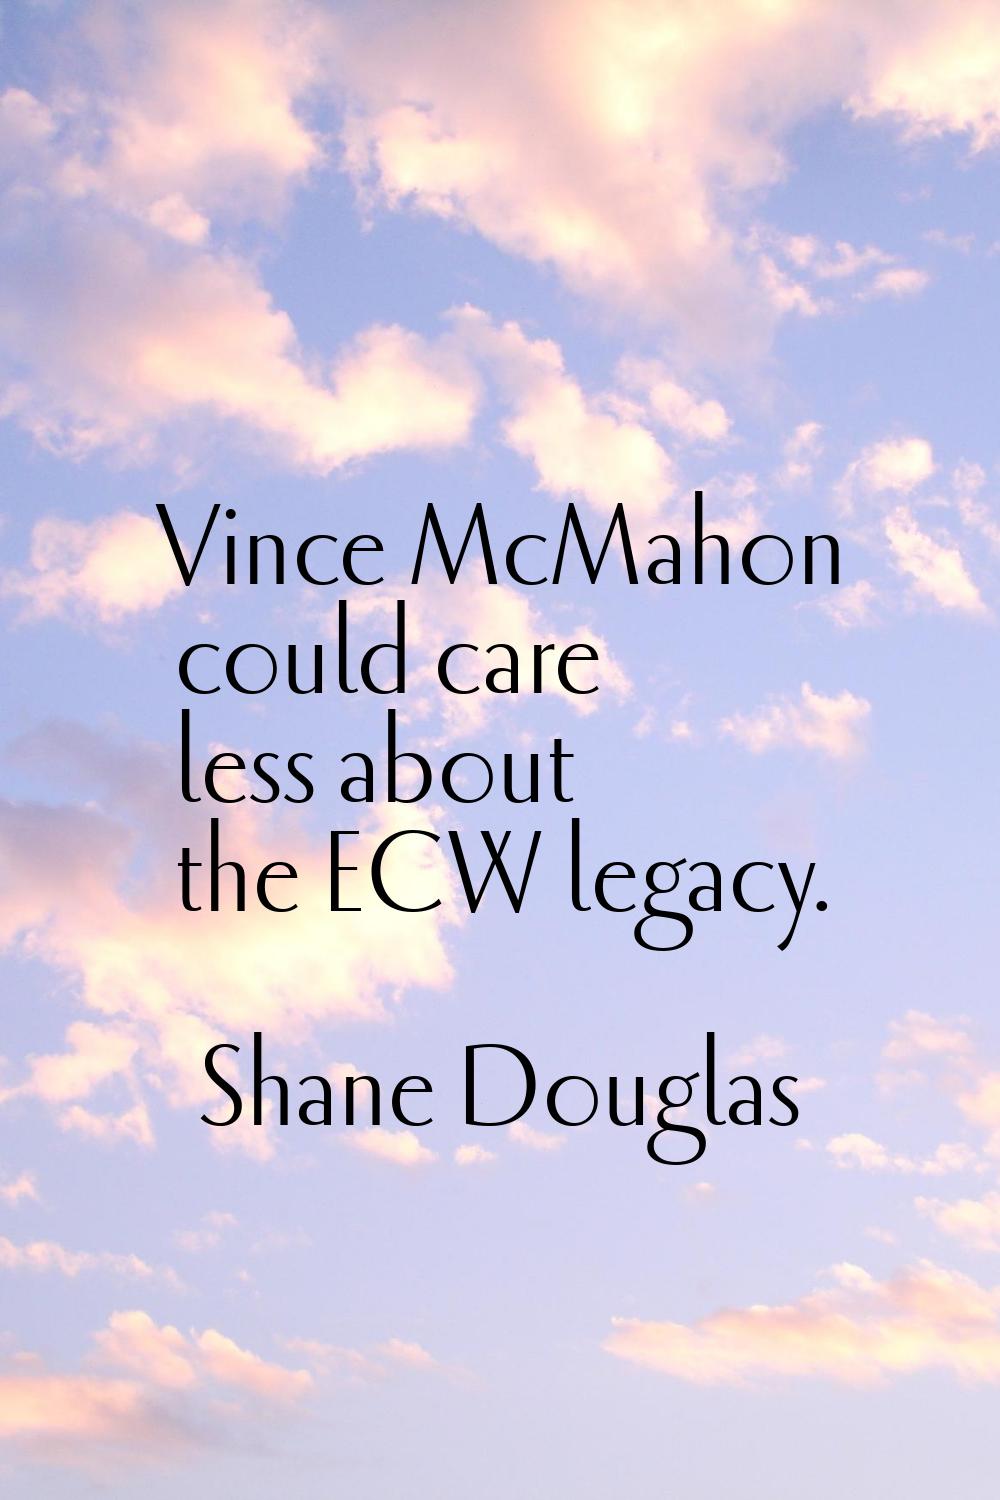 Vince McMahon could care less about the ECW legacy.